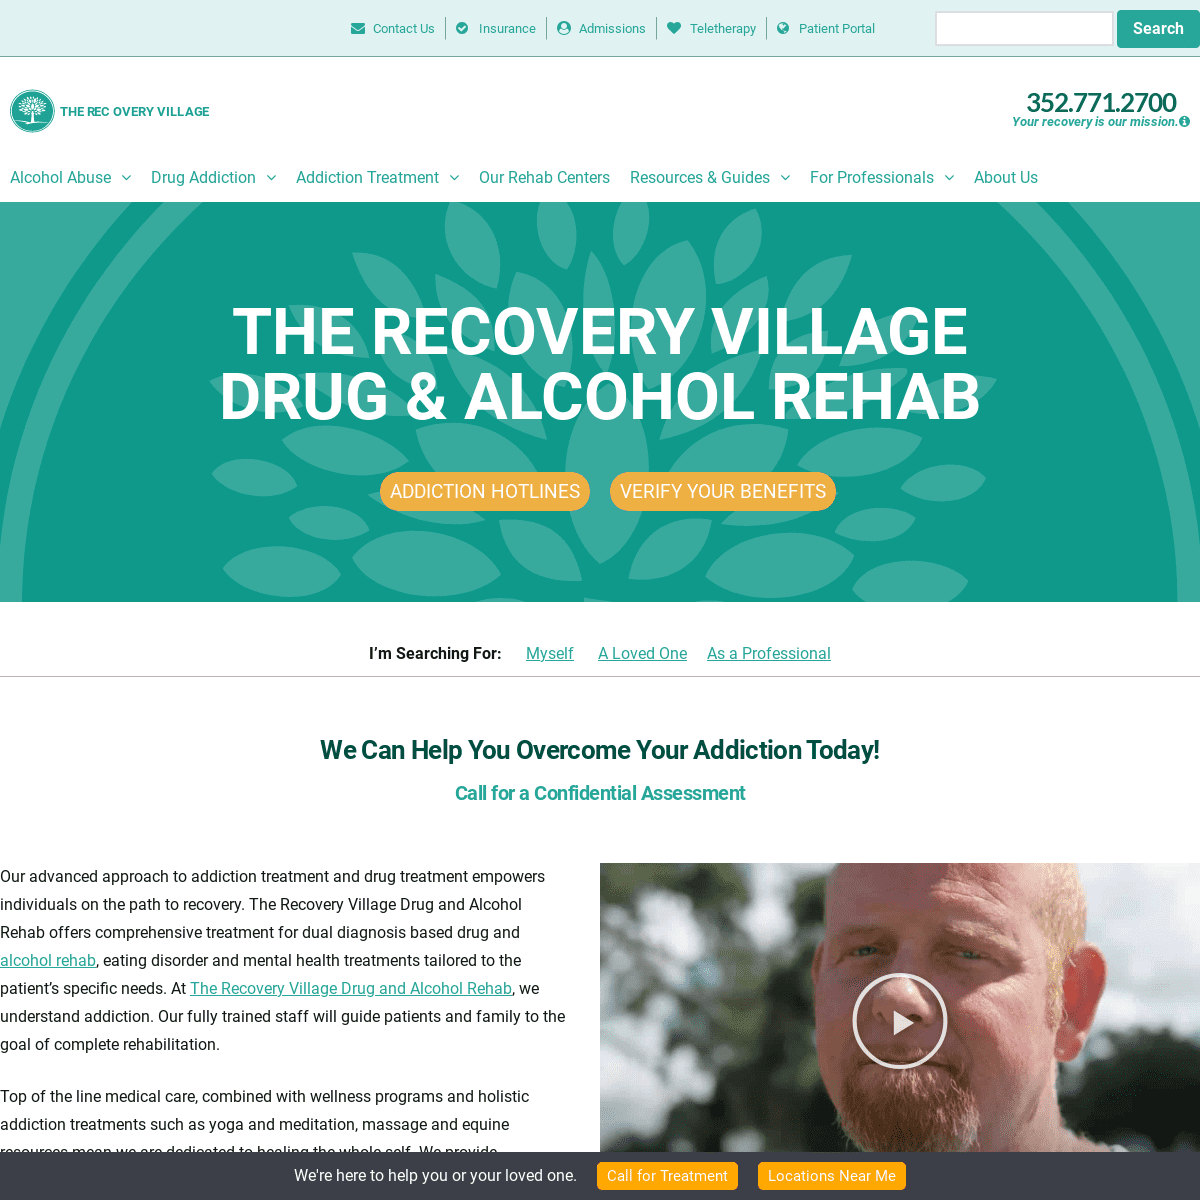 A complete backup of https://therecoveryvillage.com